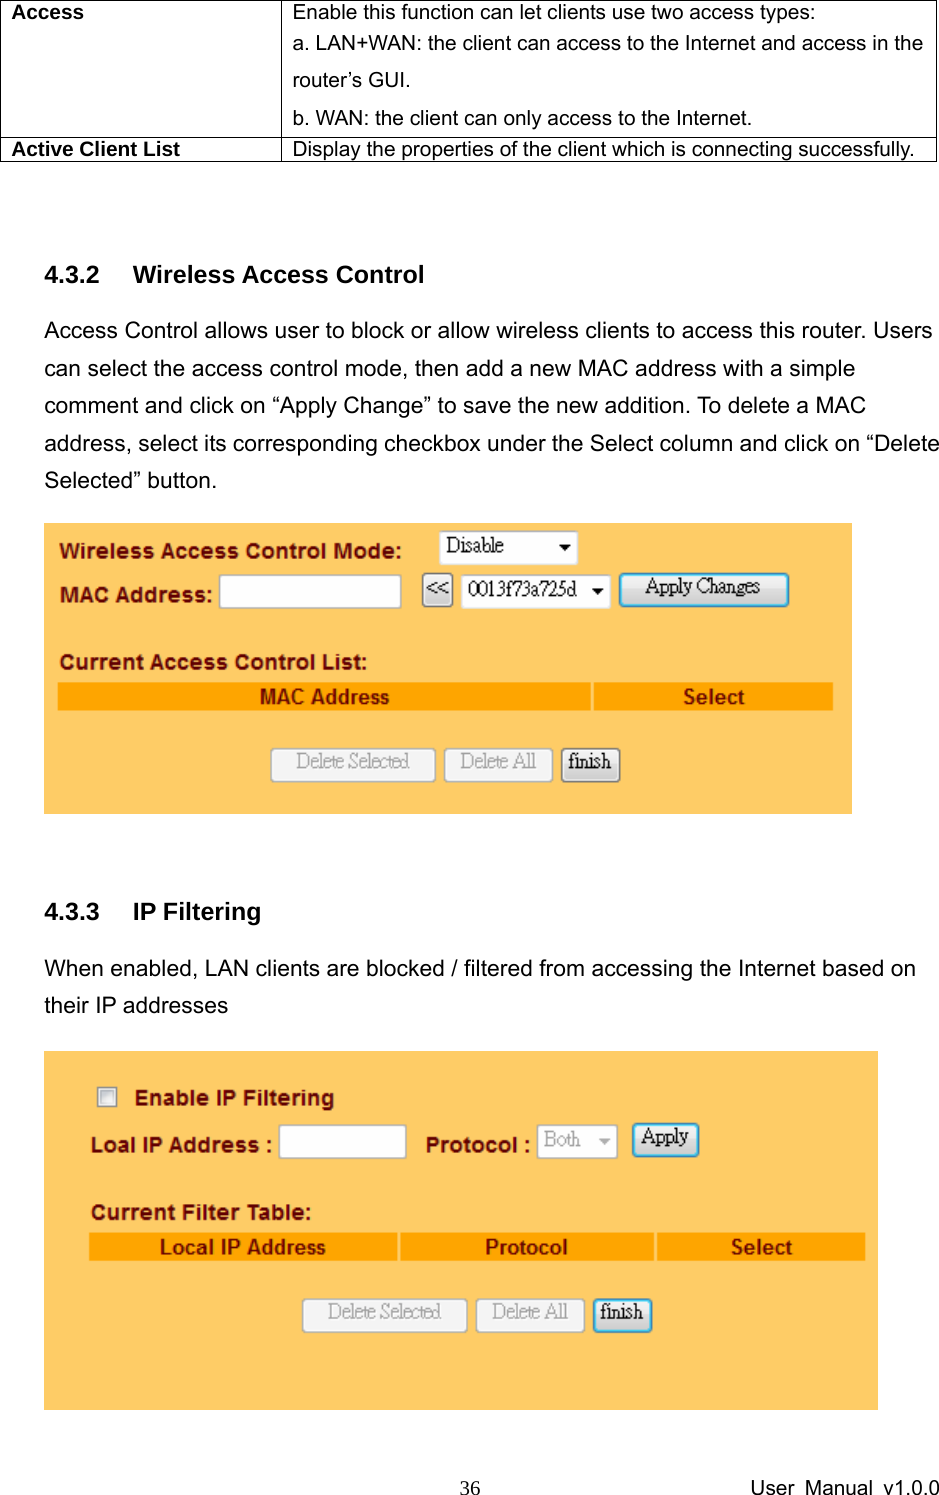                 User Manual v1.0.0 36Access  Enable this function can let clients use two access types:   a. LAN+WAN: the client can access to the Internet and access in the router’s GUI.   b. WAN: the client can only access to the Internet. Active Client List     Display the properties of the client which is connecting successfully.  4.3.2 Wireless Access Control Access Control allows user to block or allow wireless clients to access this router. Users can select the access control mode, then add a new MAC address with a simple comment and click on “Apply Change” to save the new addition. To delete a MAC address, select its corresponding checkbox under the Select column and click on “Delete Selected” button.   4.3.3 IP Filtering When enabled, LAN clients are blocked / filtered from accessing the Internet based on their IP addresses  